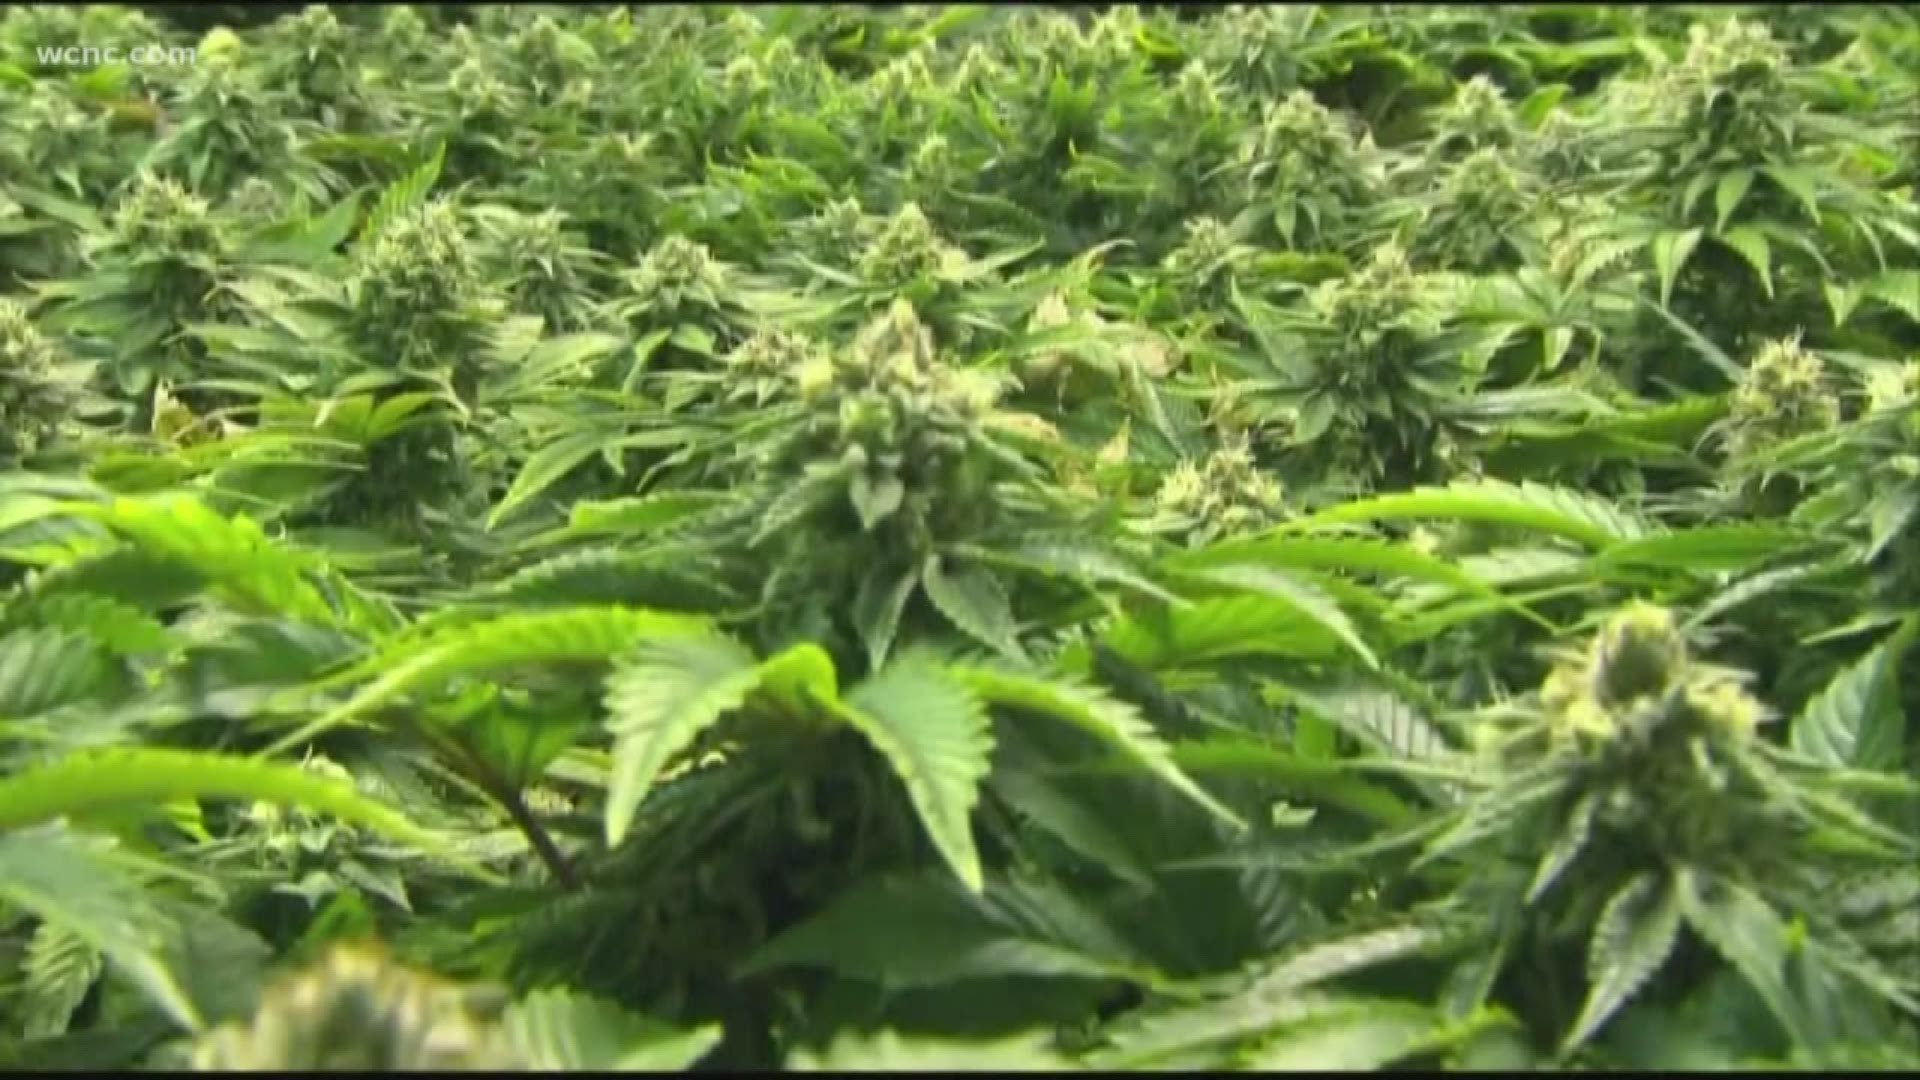 The Tar Heel State could be one step closer to legalizing recreational marijuana.